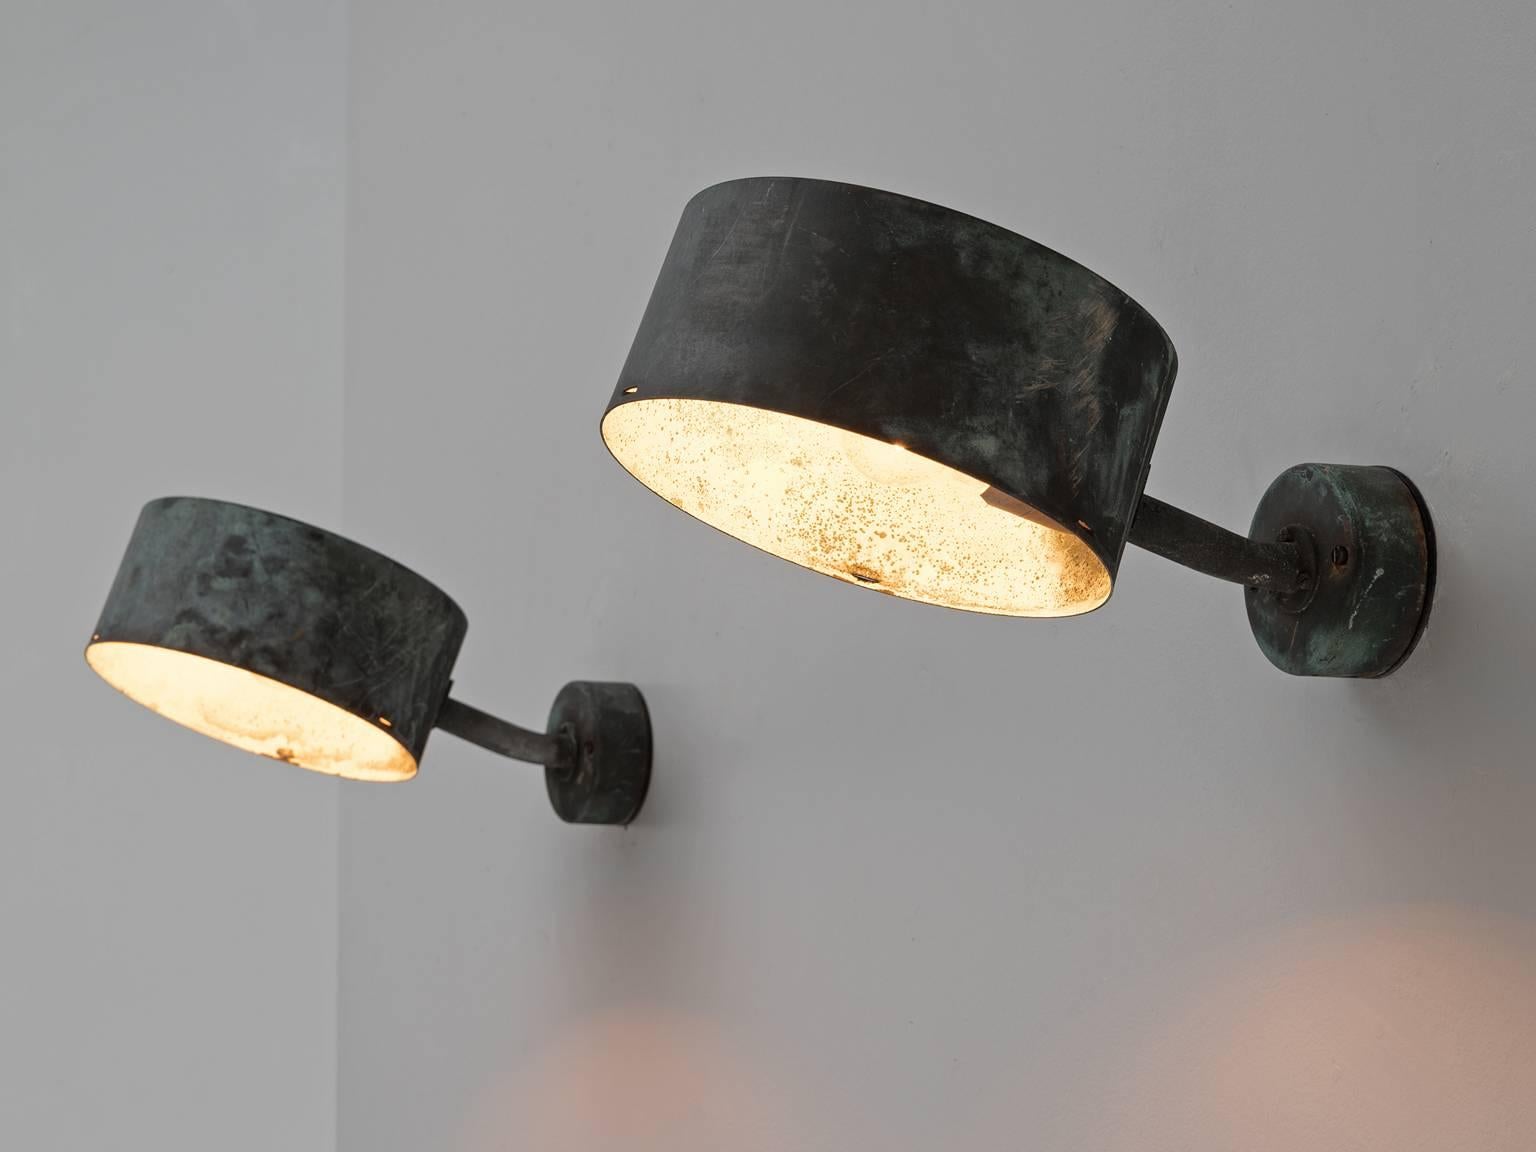 Set of two wall lights, in copper and metal, by Hans-Agne Jakobsson for AB Markaryd, Sweden, 1950s. 

Set of two wall lights designed by Hans-Agne Jakobsson for AB Markaryd in beautifully patinated copper. Well known are the cone shaped wall lights,